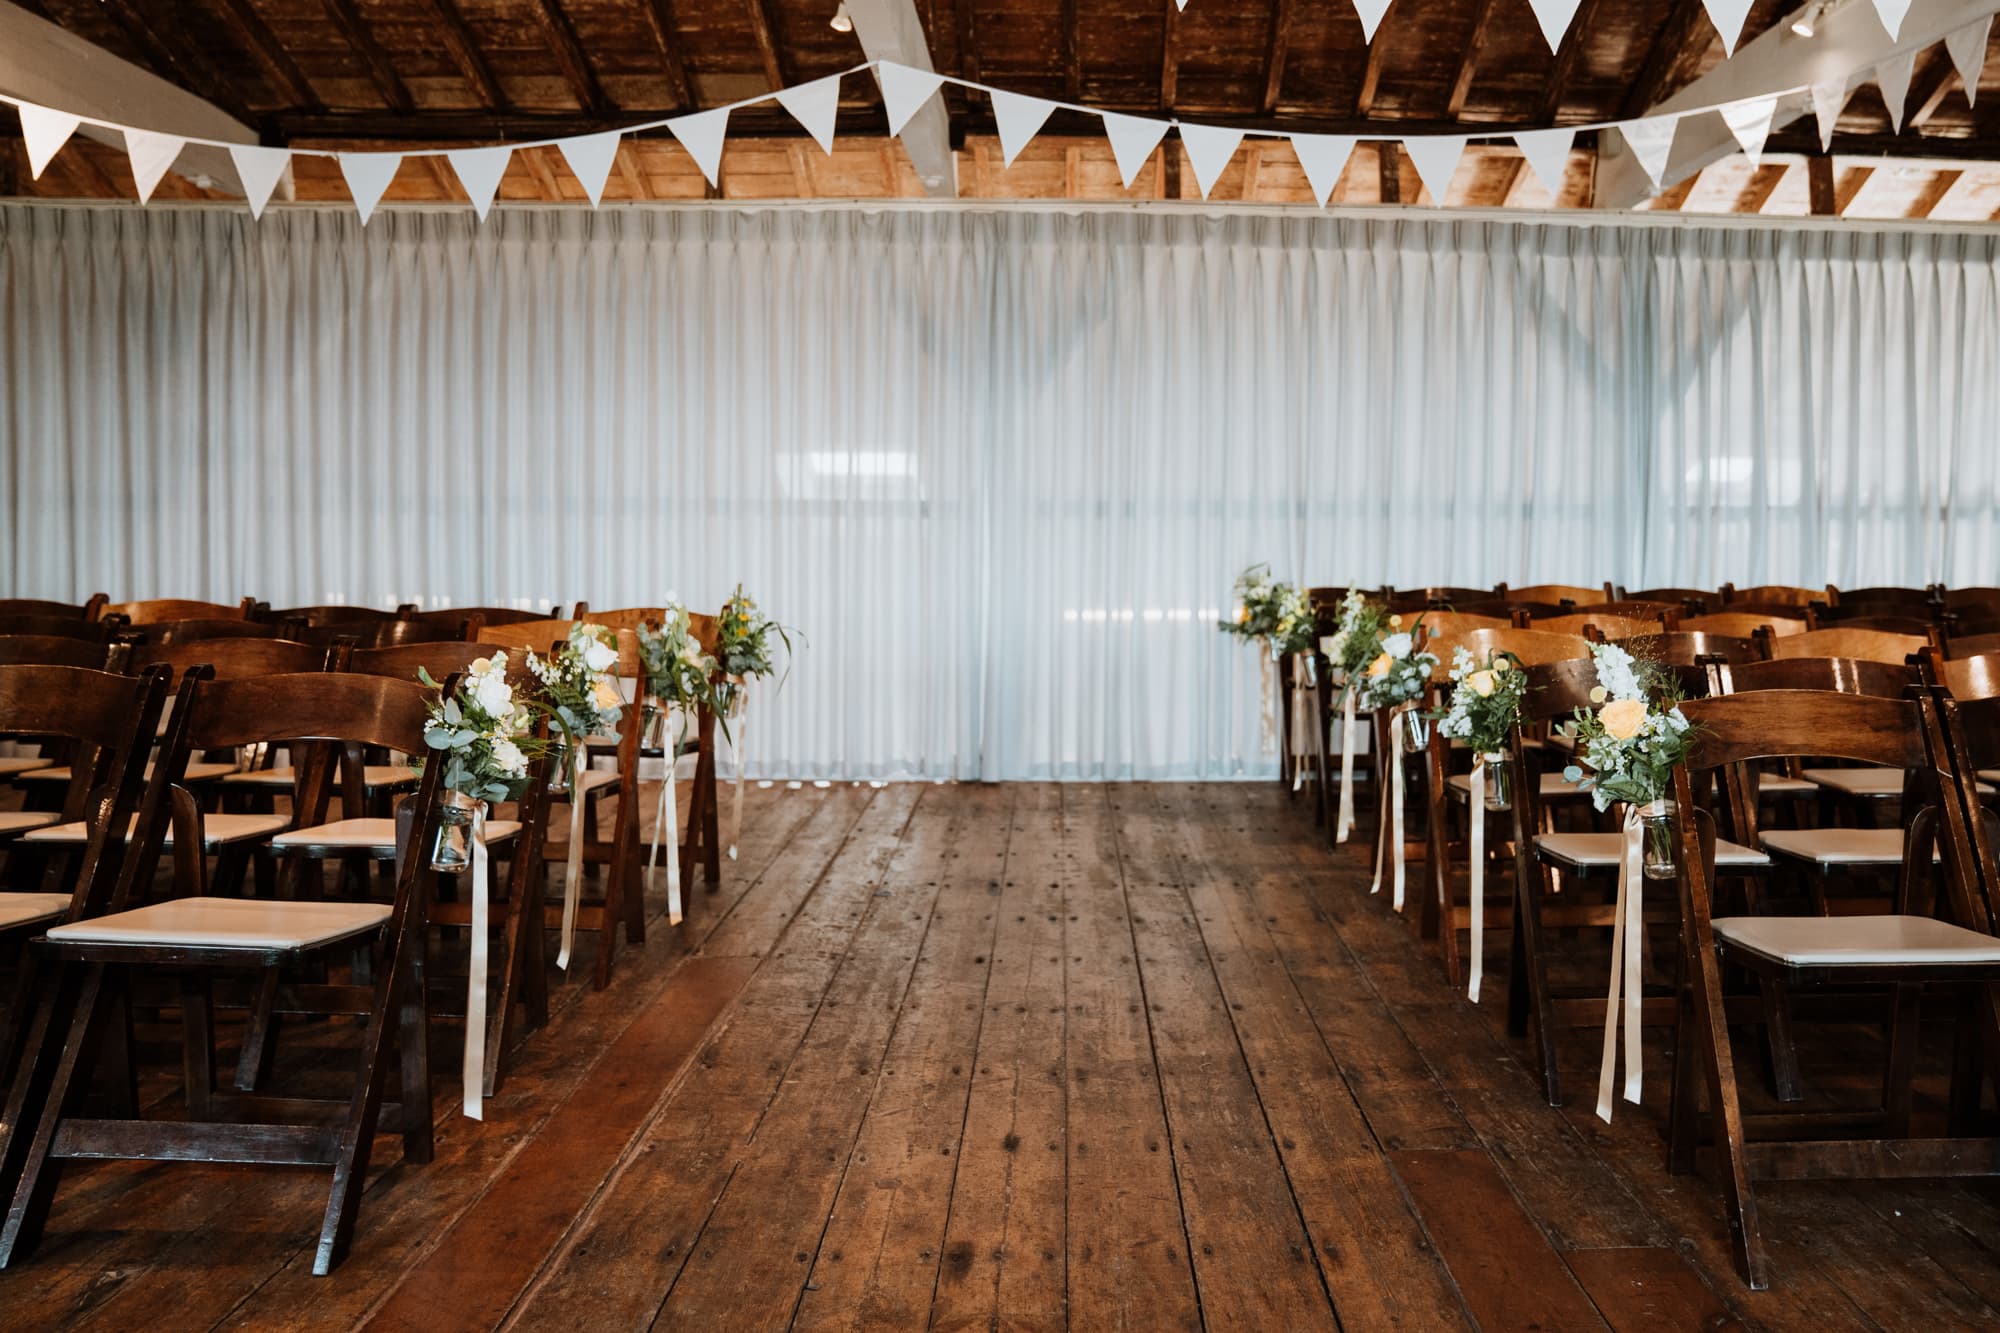 Ceremony room at East Quay with row end chairs dressed with green and yellow flowers